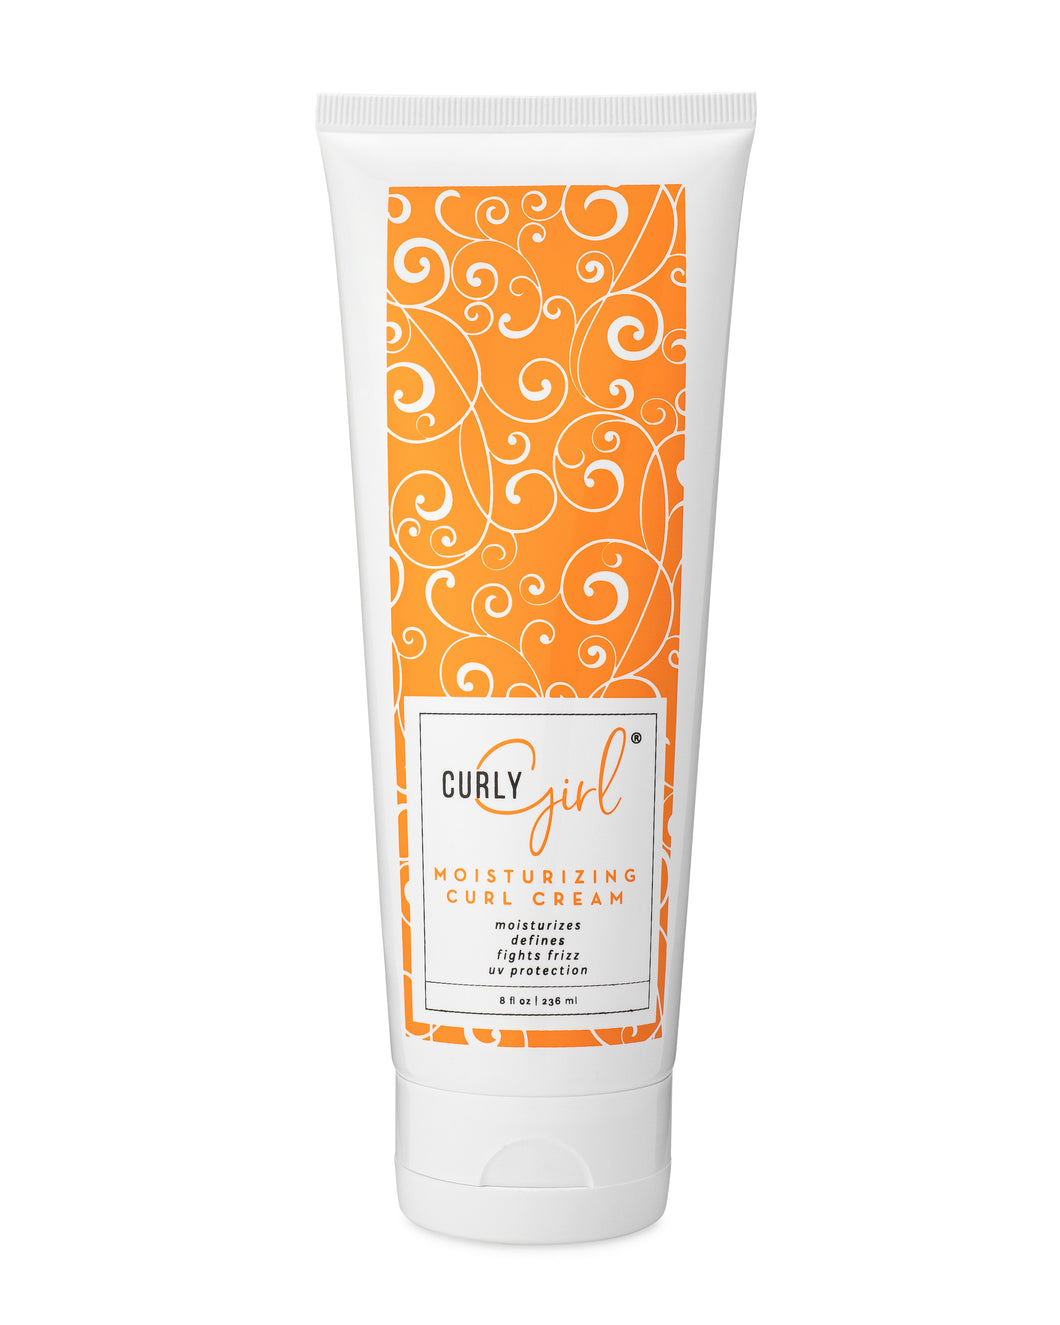 Curly Girl Moisturizing Curl Cream, Defines, Fights Frizz and UV Protection 8 Fl. Oz.